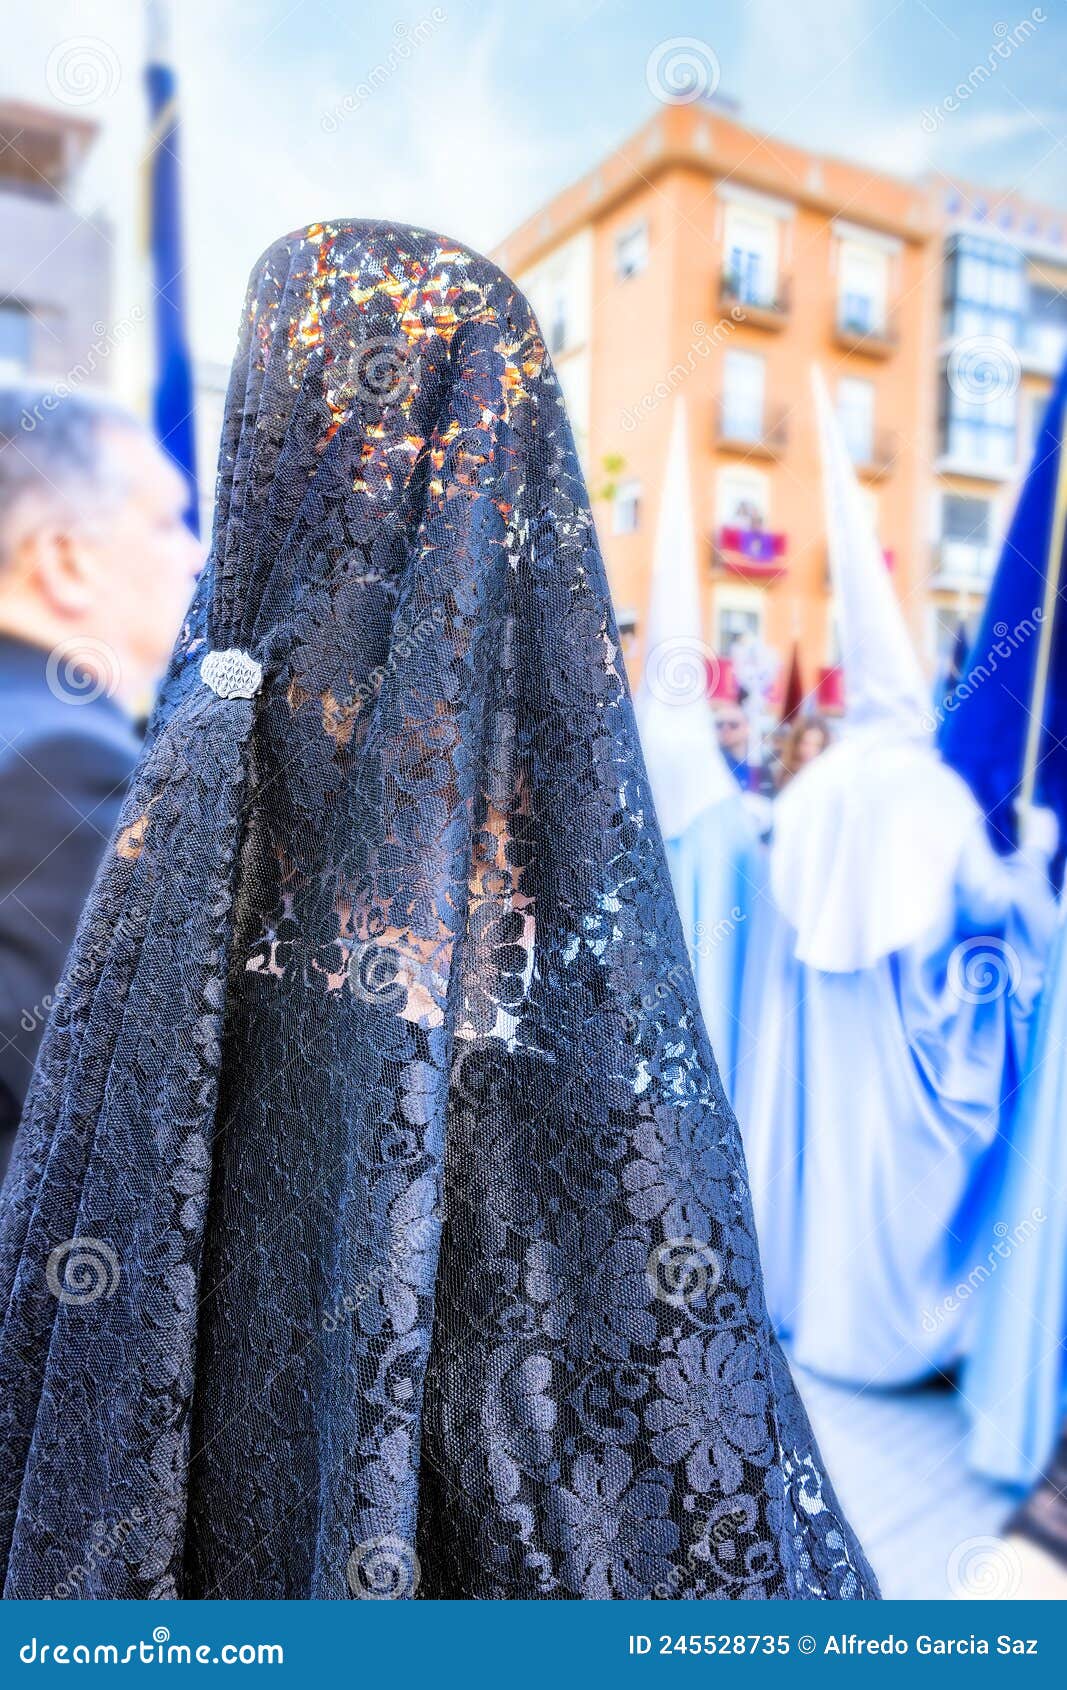 detail of the head of a woman with a black spanish mantilla and peineta ornamental comb, seen from behind, in a holy week